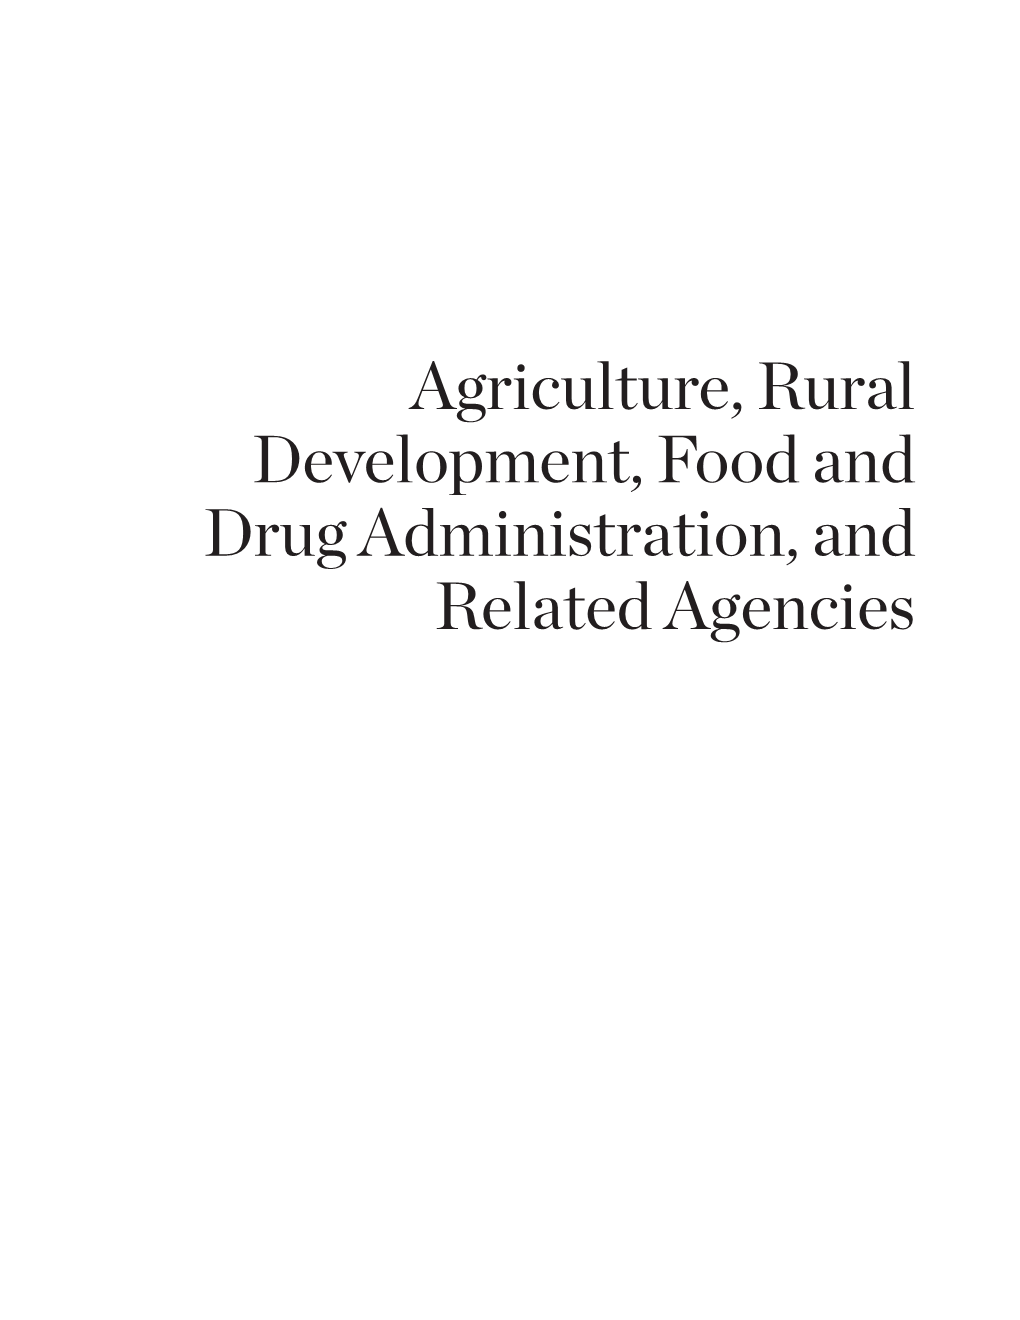 Agriculture, Rural Development, Food and Drug Administration, And